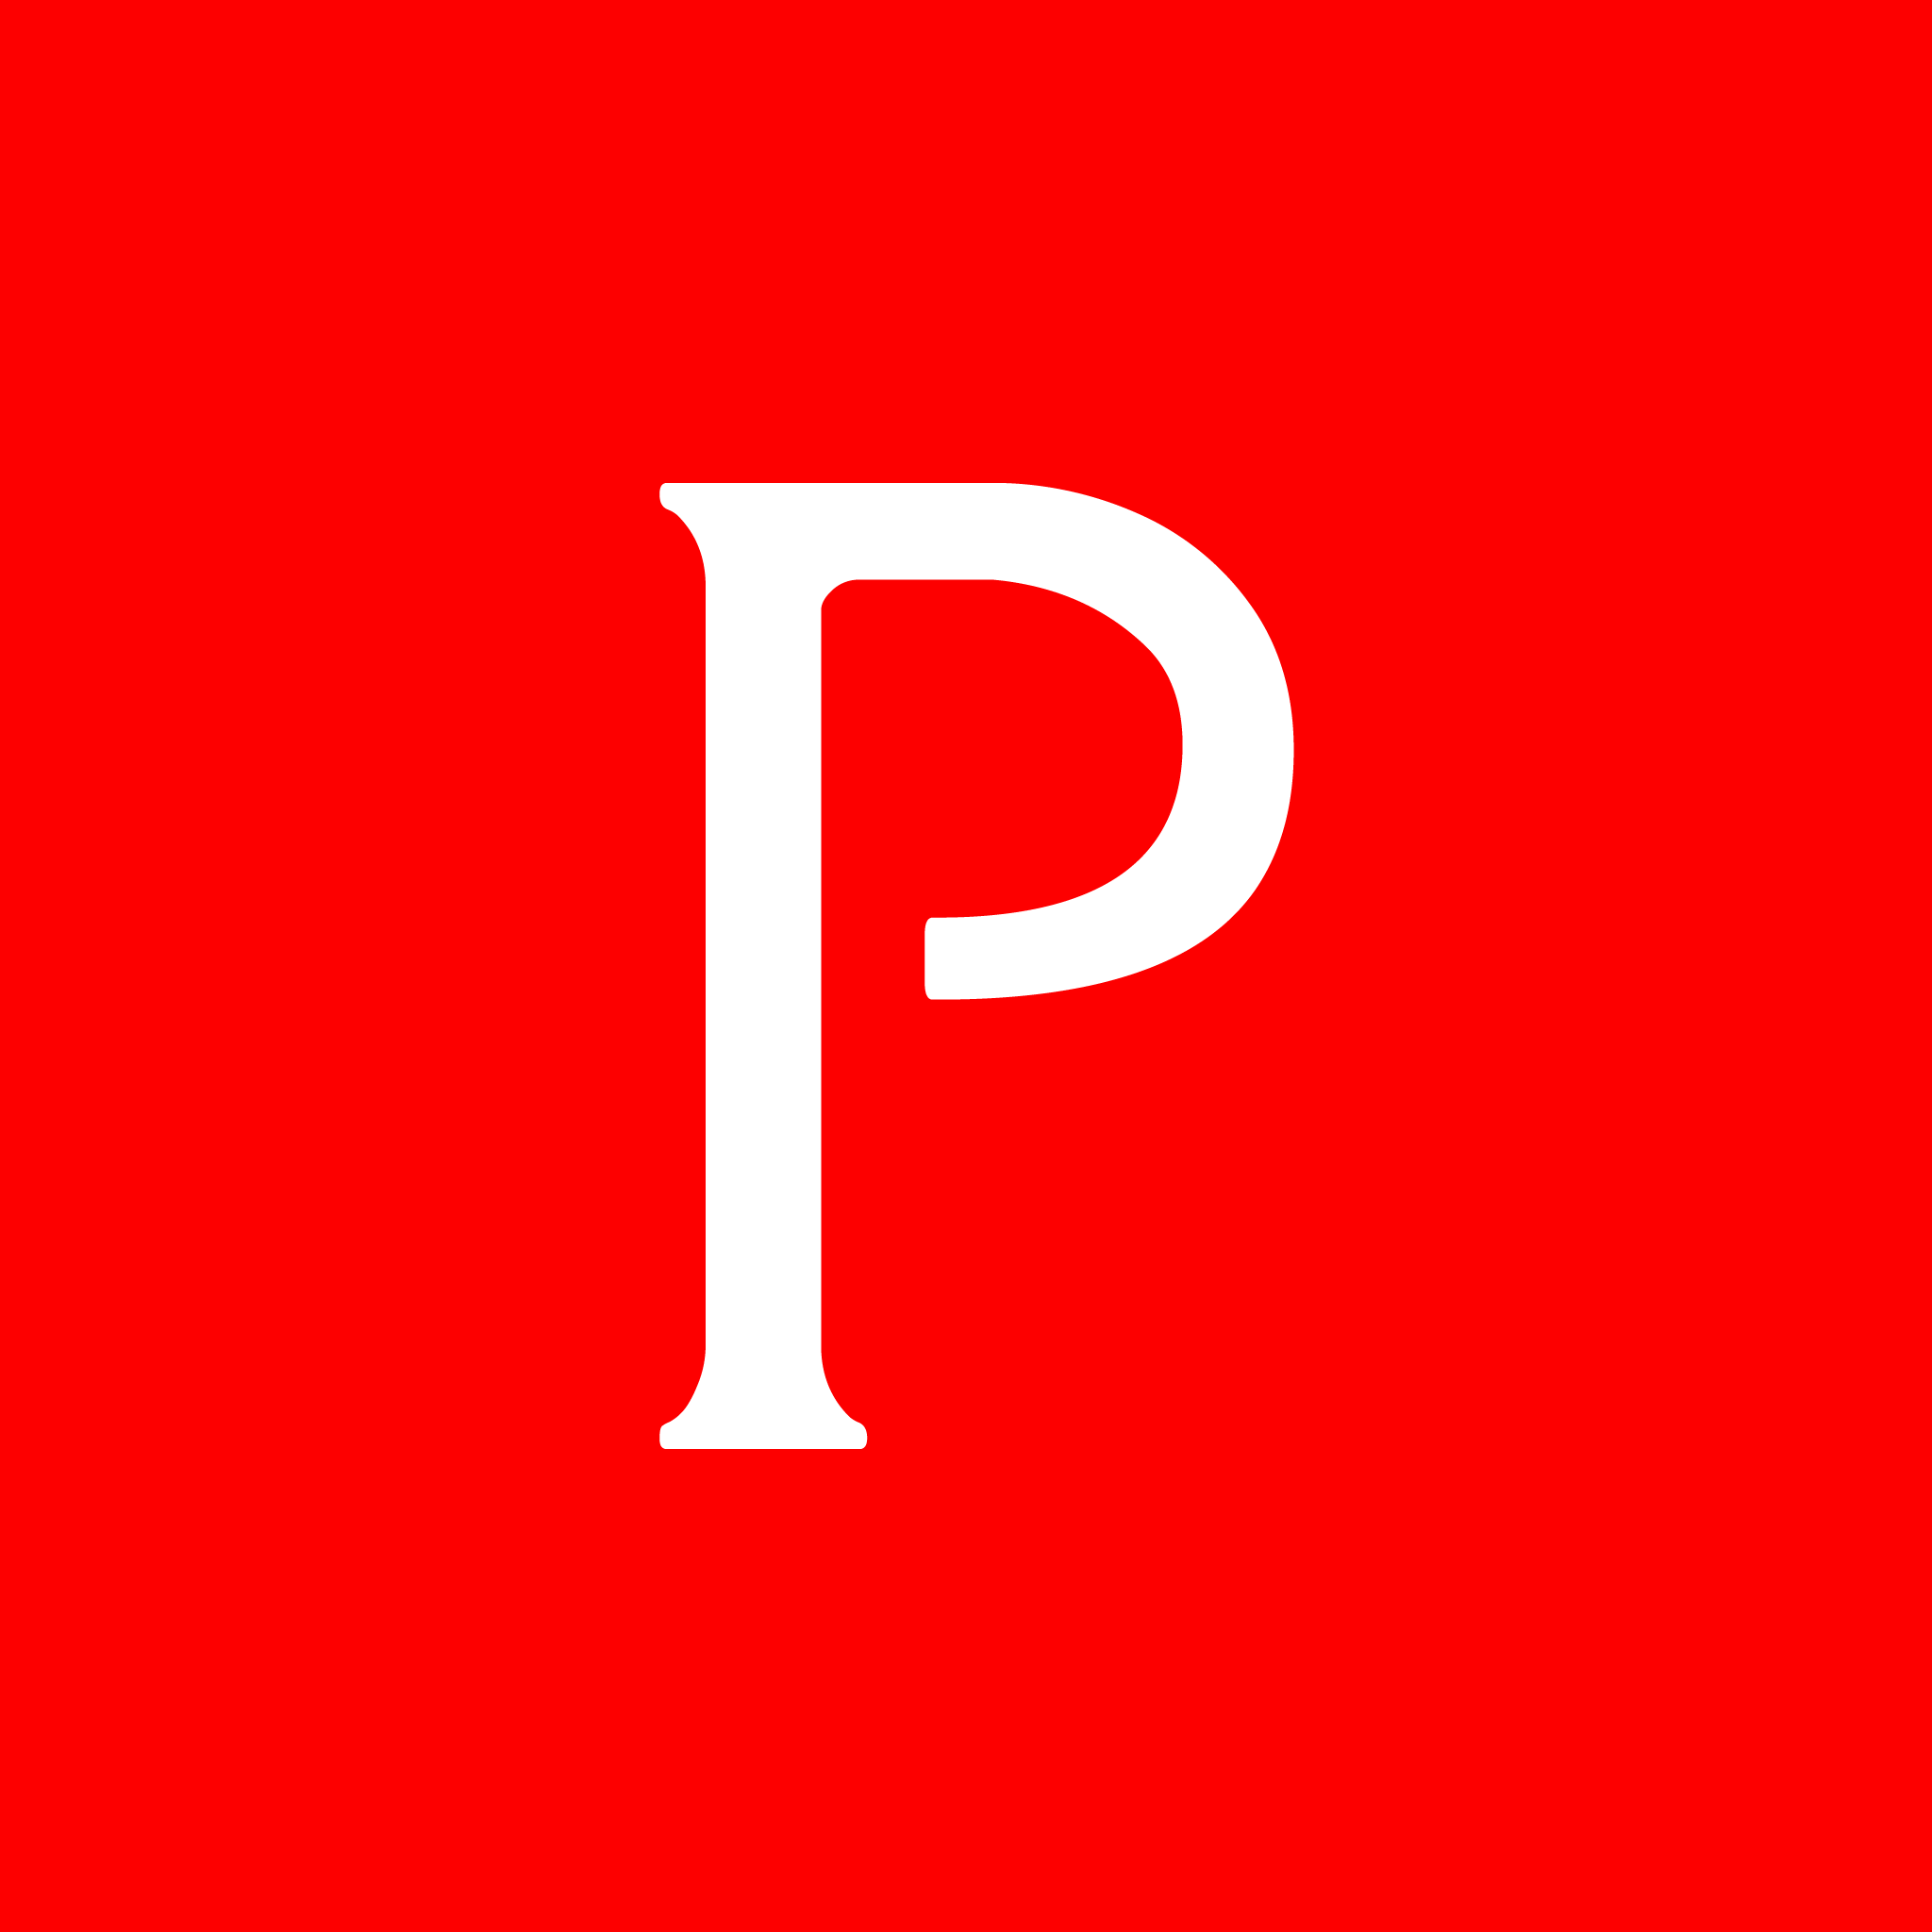 The Pangolin’s logo, which depicts a pangolin and the publication’s name in a serif typeface.